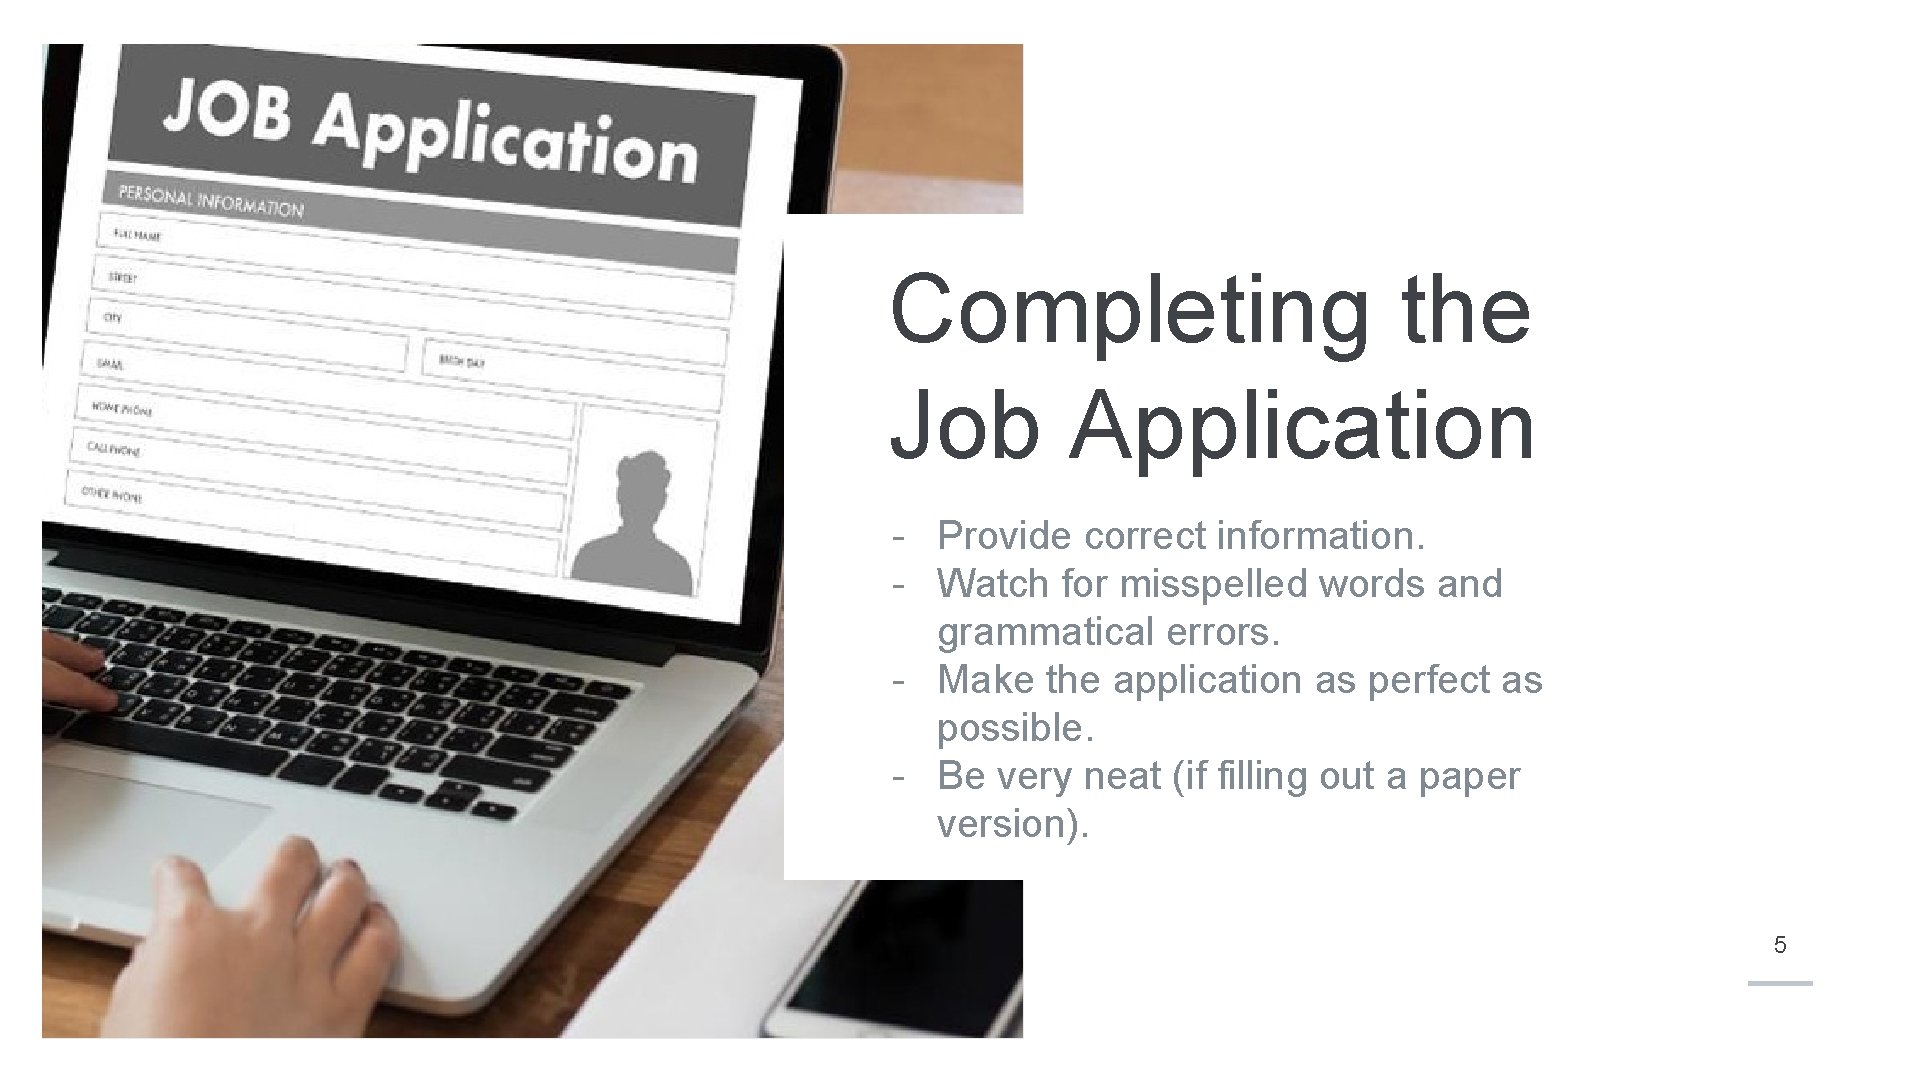 Completing the Job Application - Provide correct information. - Watch for misspelled words and